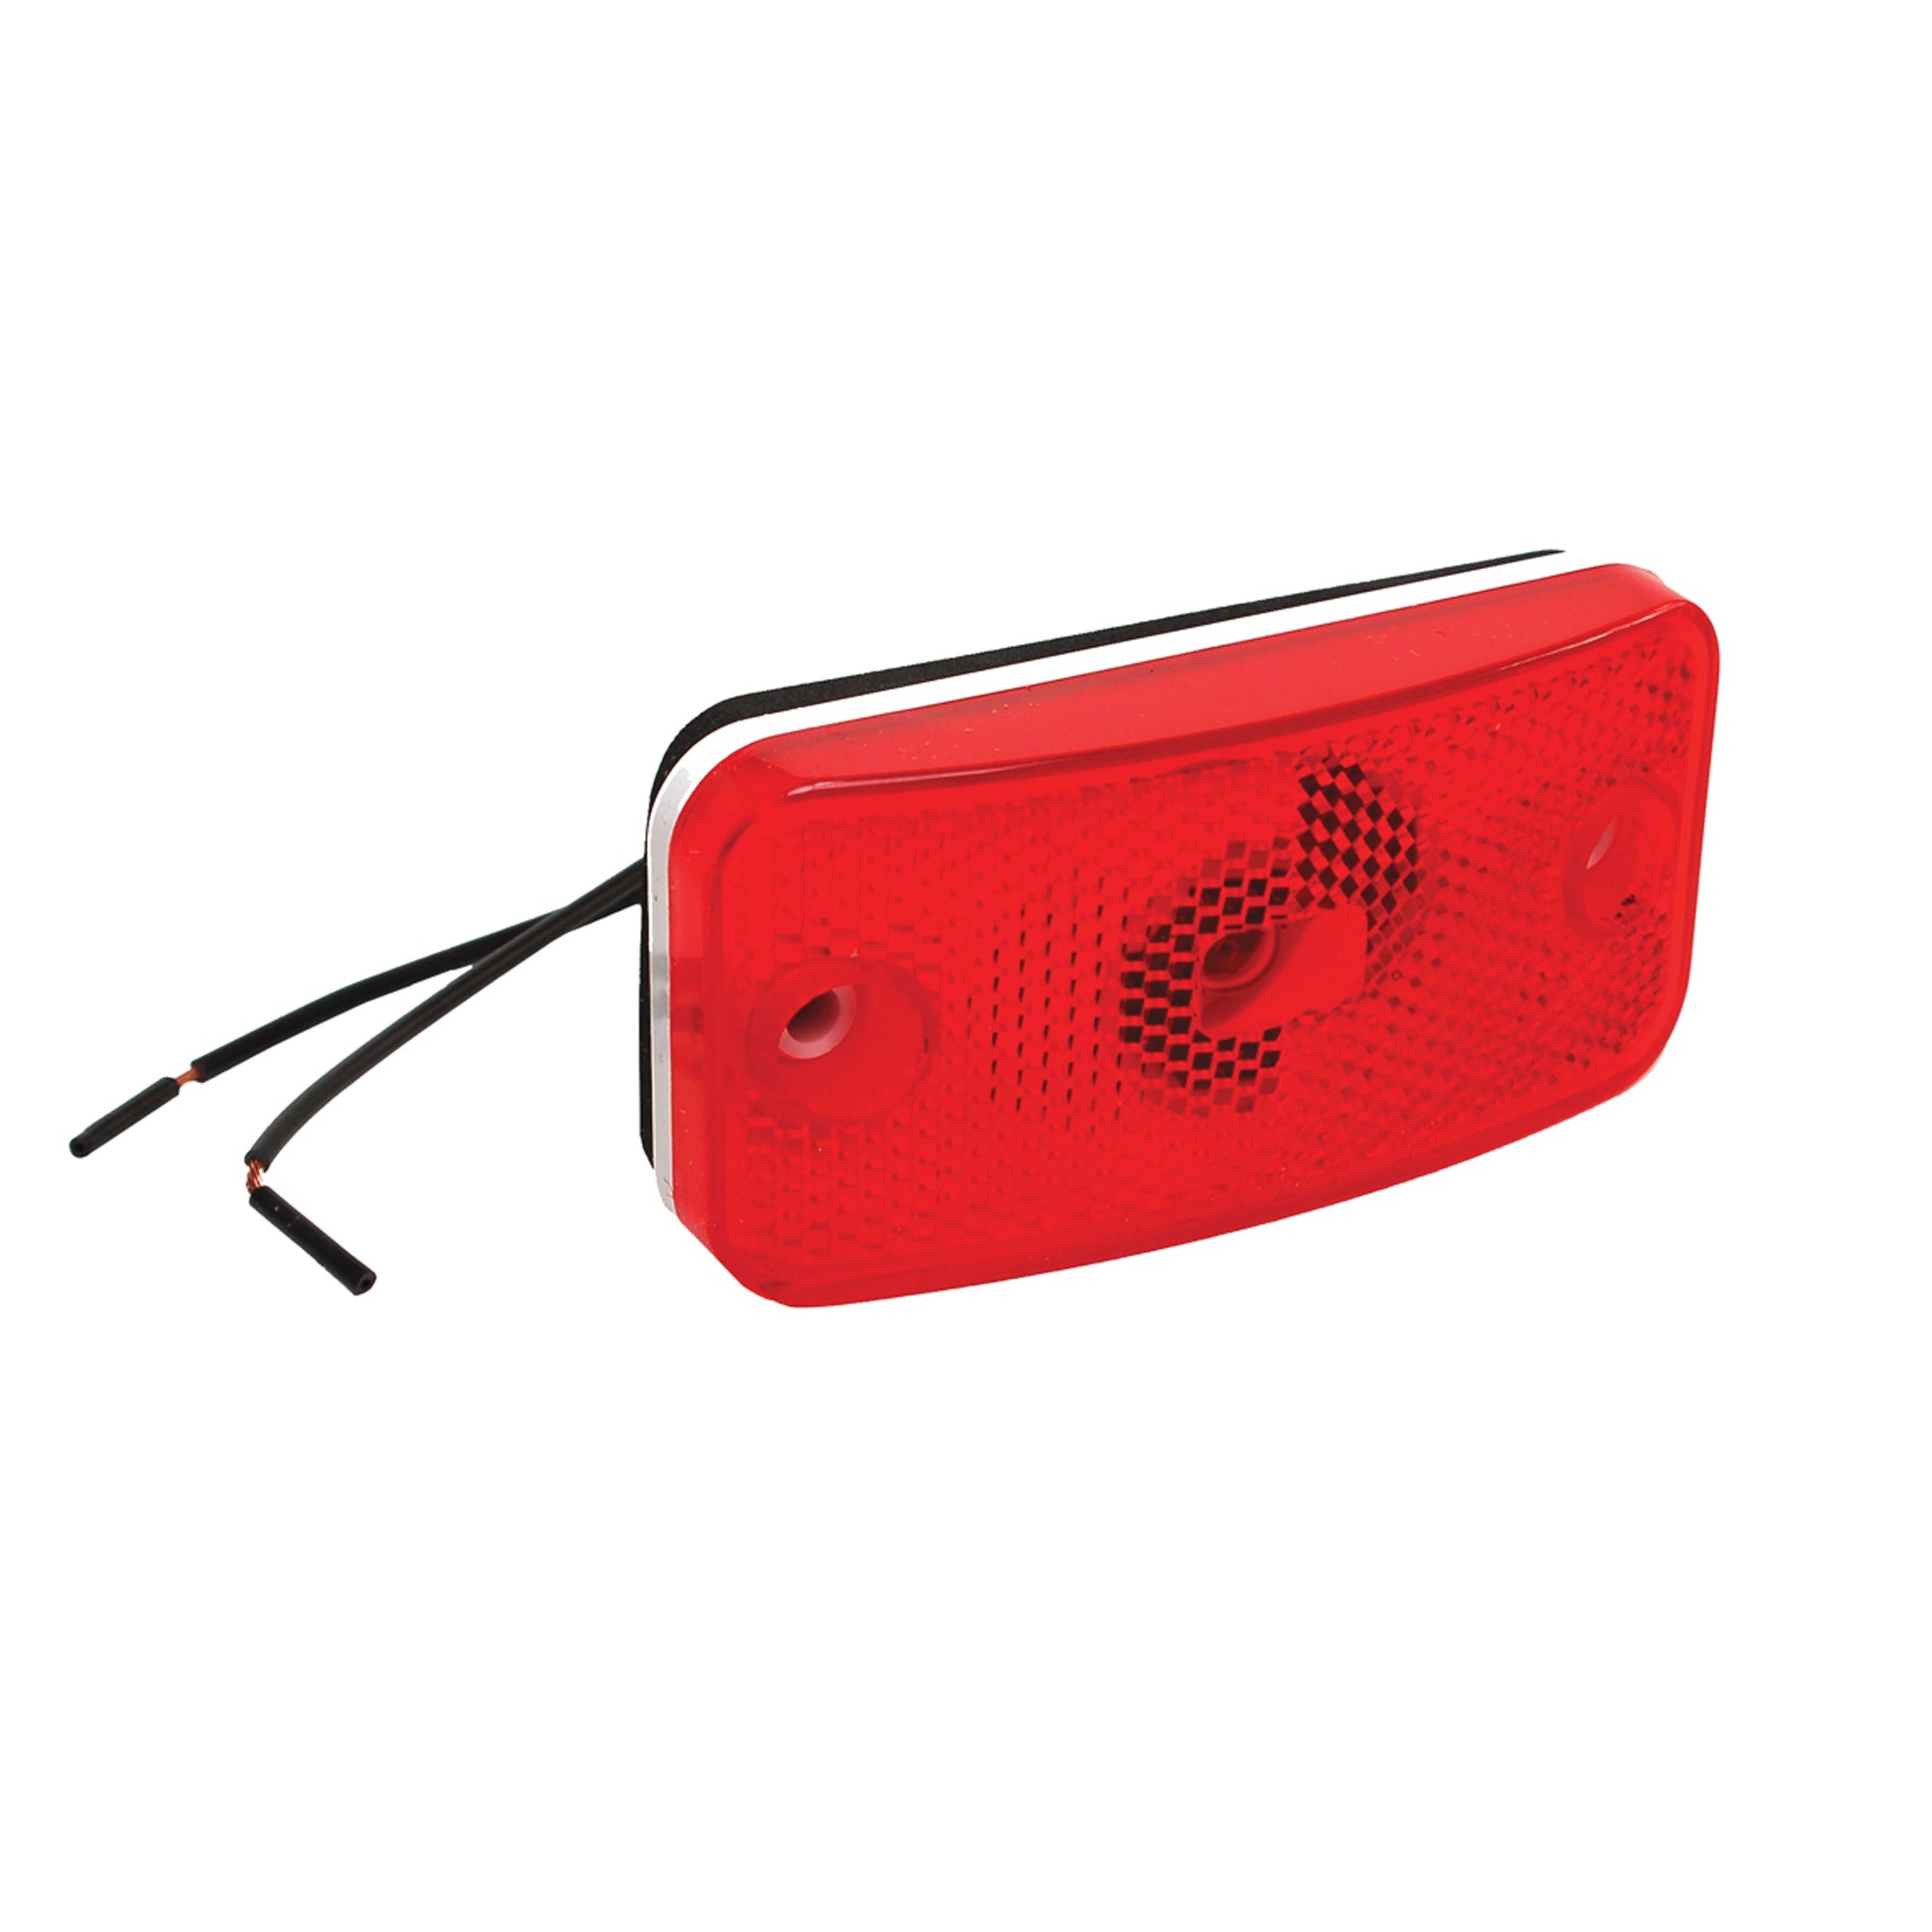 RV Designer E395 Clearance Light With Fleetwood Design - Red